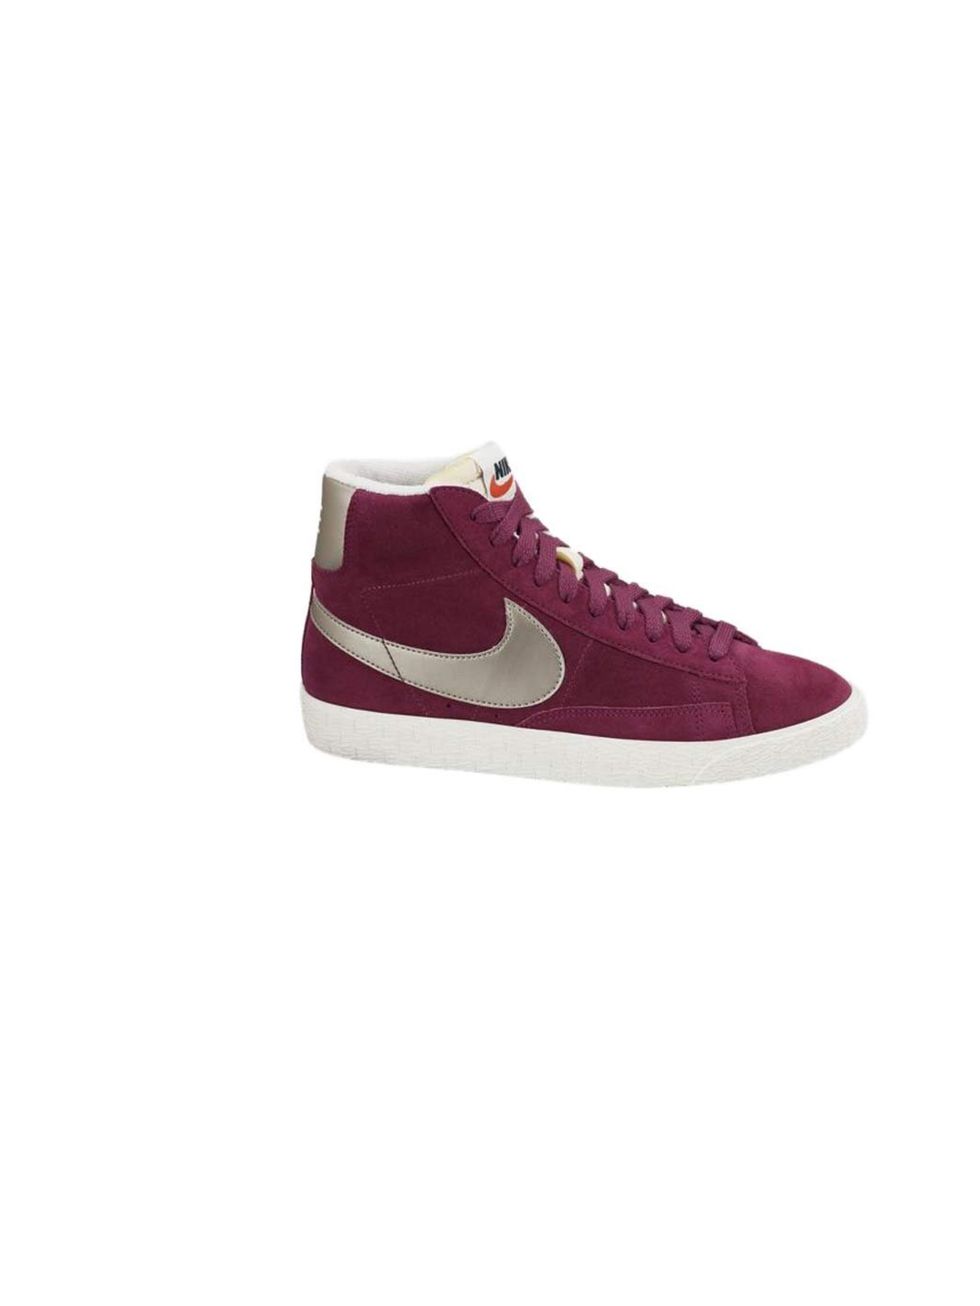 <p>These retro classics are on our new-season shopping list - and will inspire us to walk off some of those figgy puddings come January.</p><p><a href="http://store.nike.com/gb/en_gb/pd/blazer-mid-suede-vintage-shoe/pid-803583/pgid-553280">Nike</a> traine